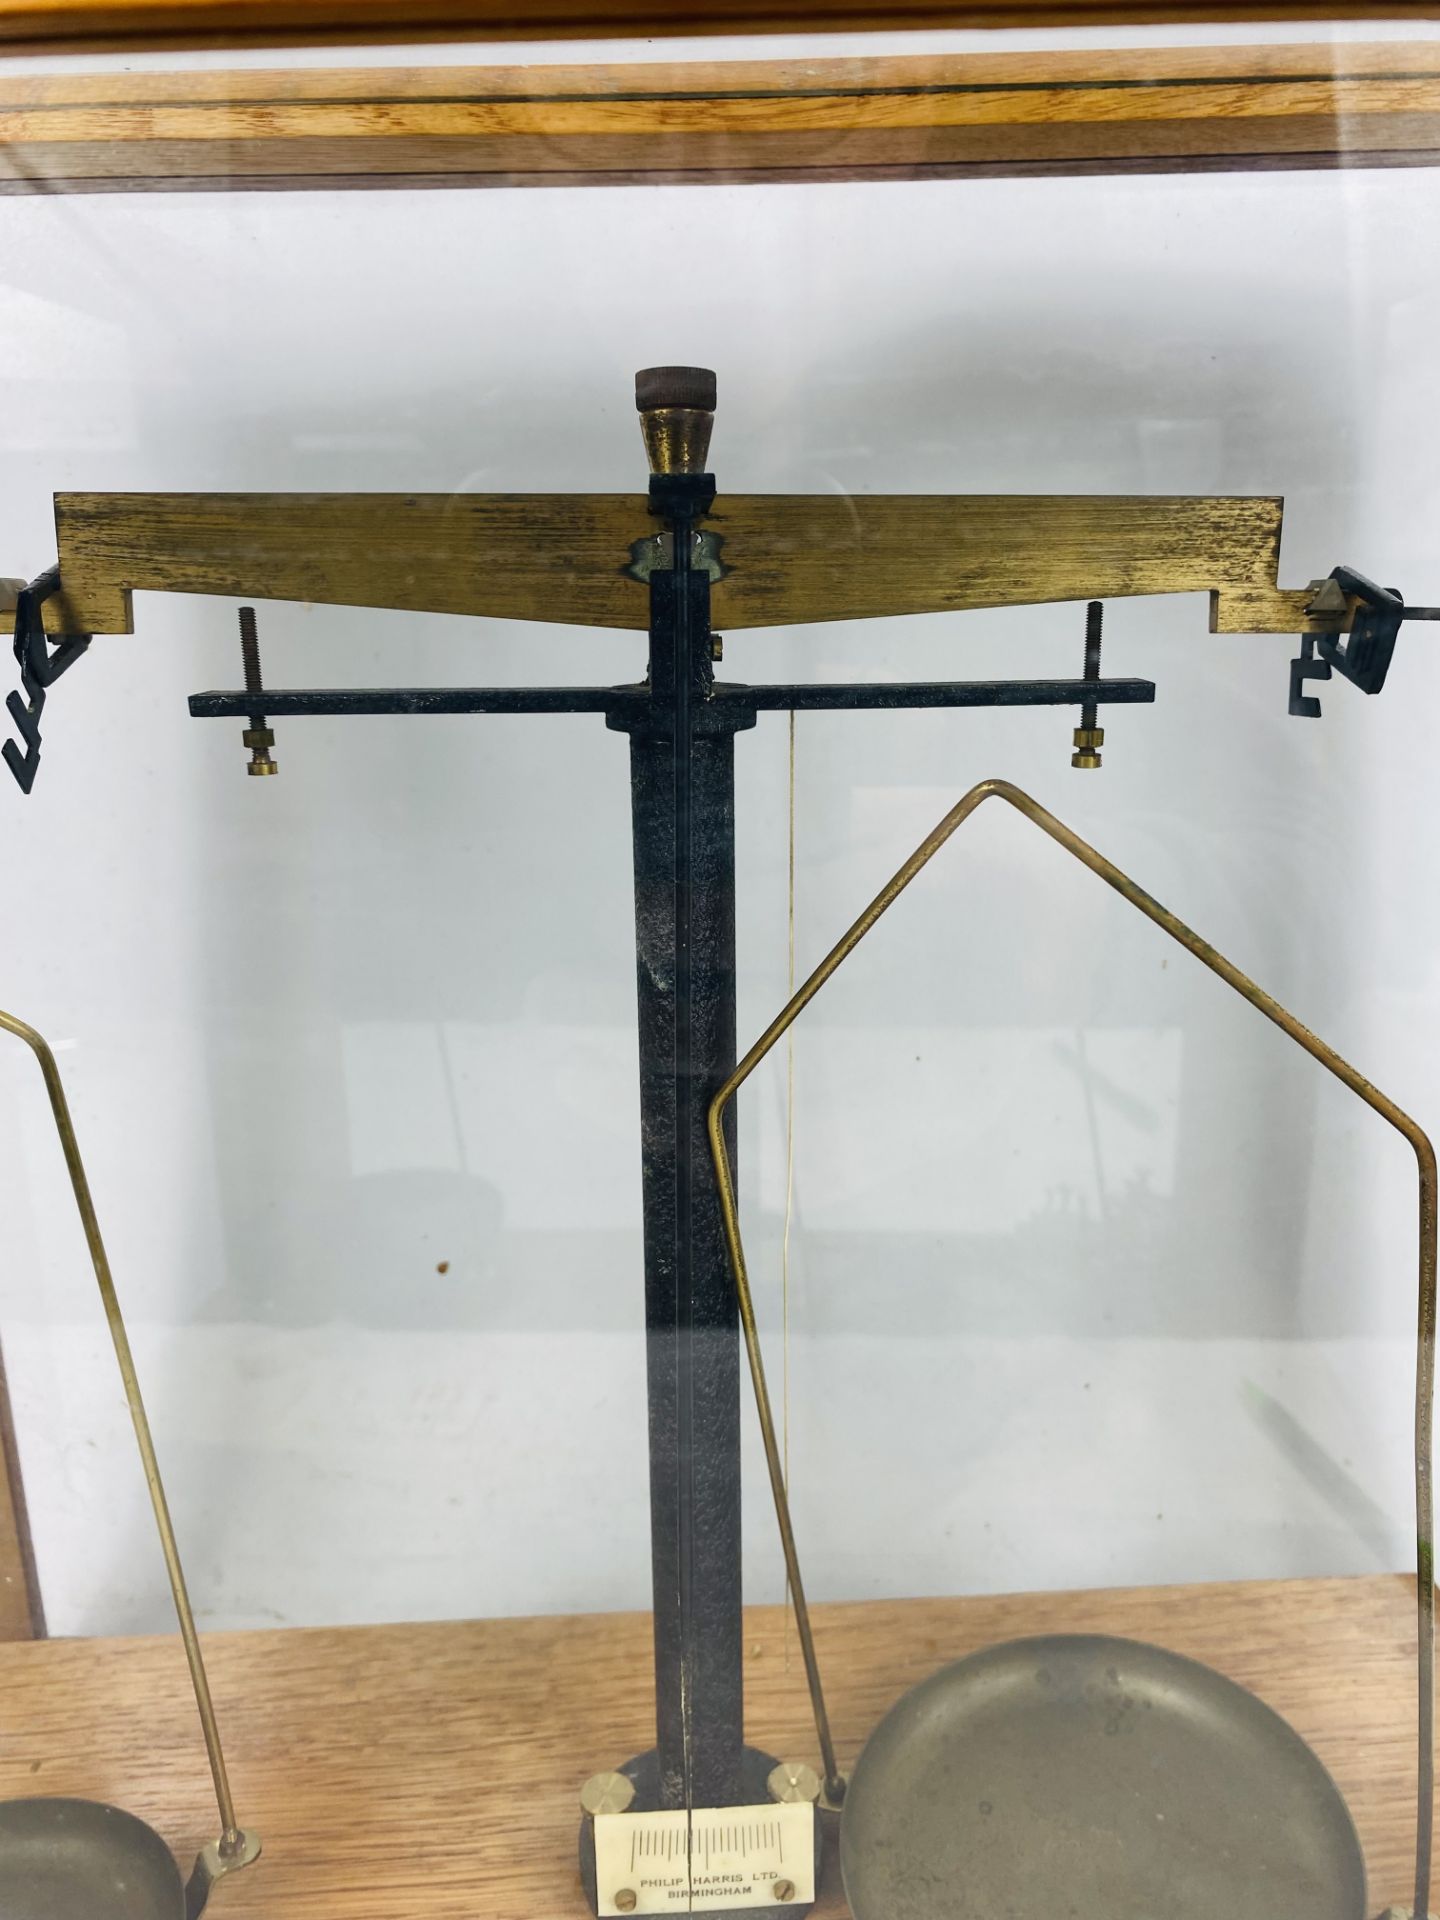 A set of balance scales by Philip Harris of Birmingham - Image 3 of 4